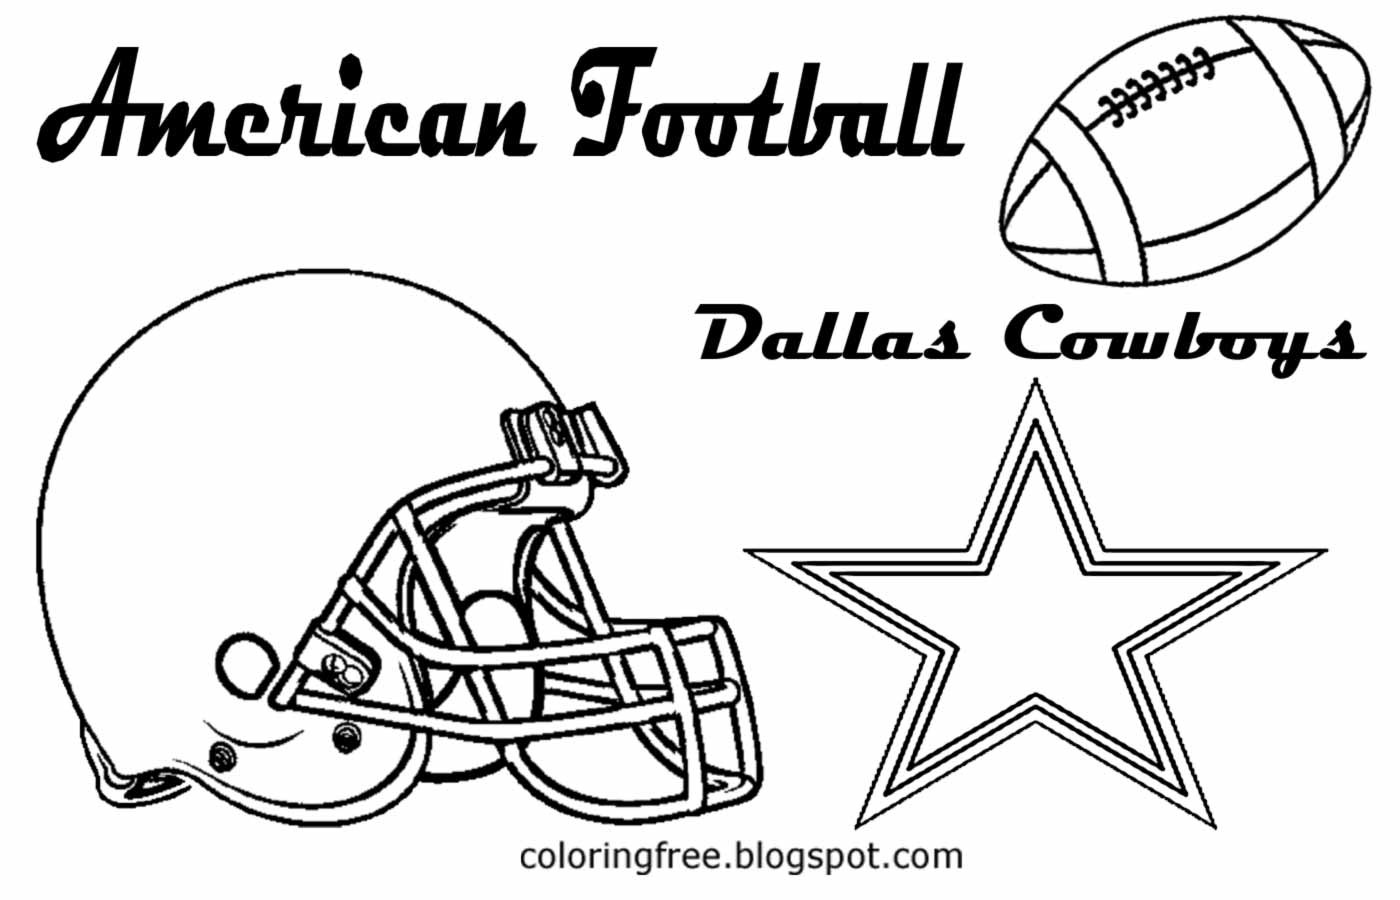 Cowboys Football Coloring Pages
 Dallas Cowboys Coloring Pages Learny Kids